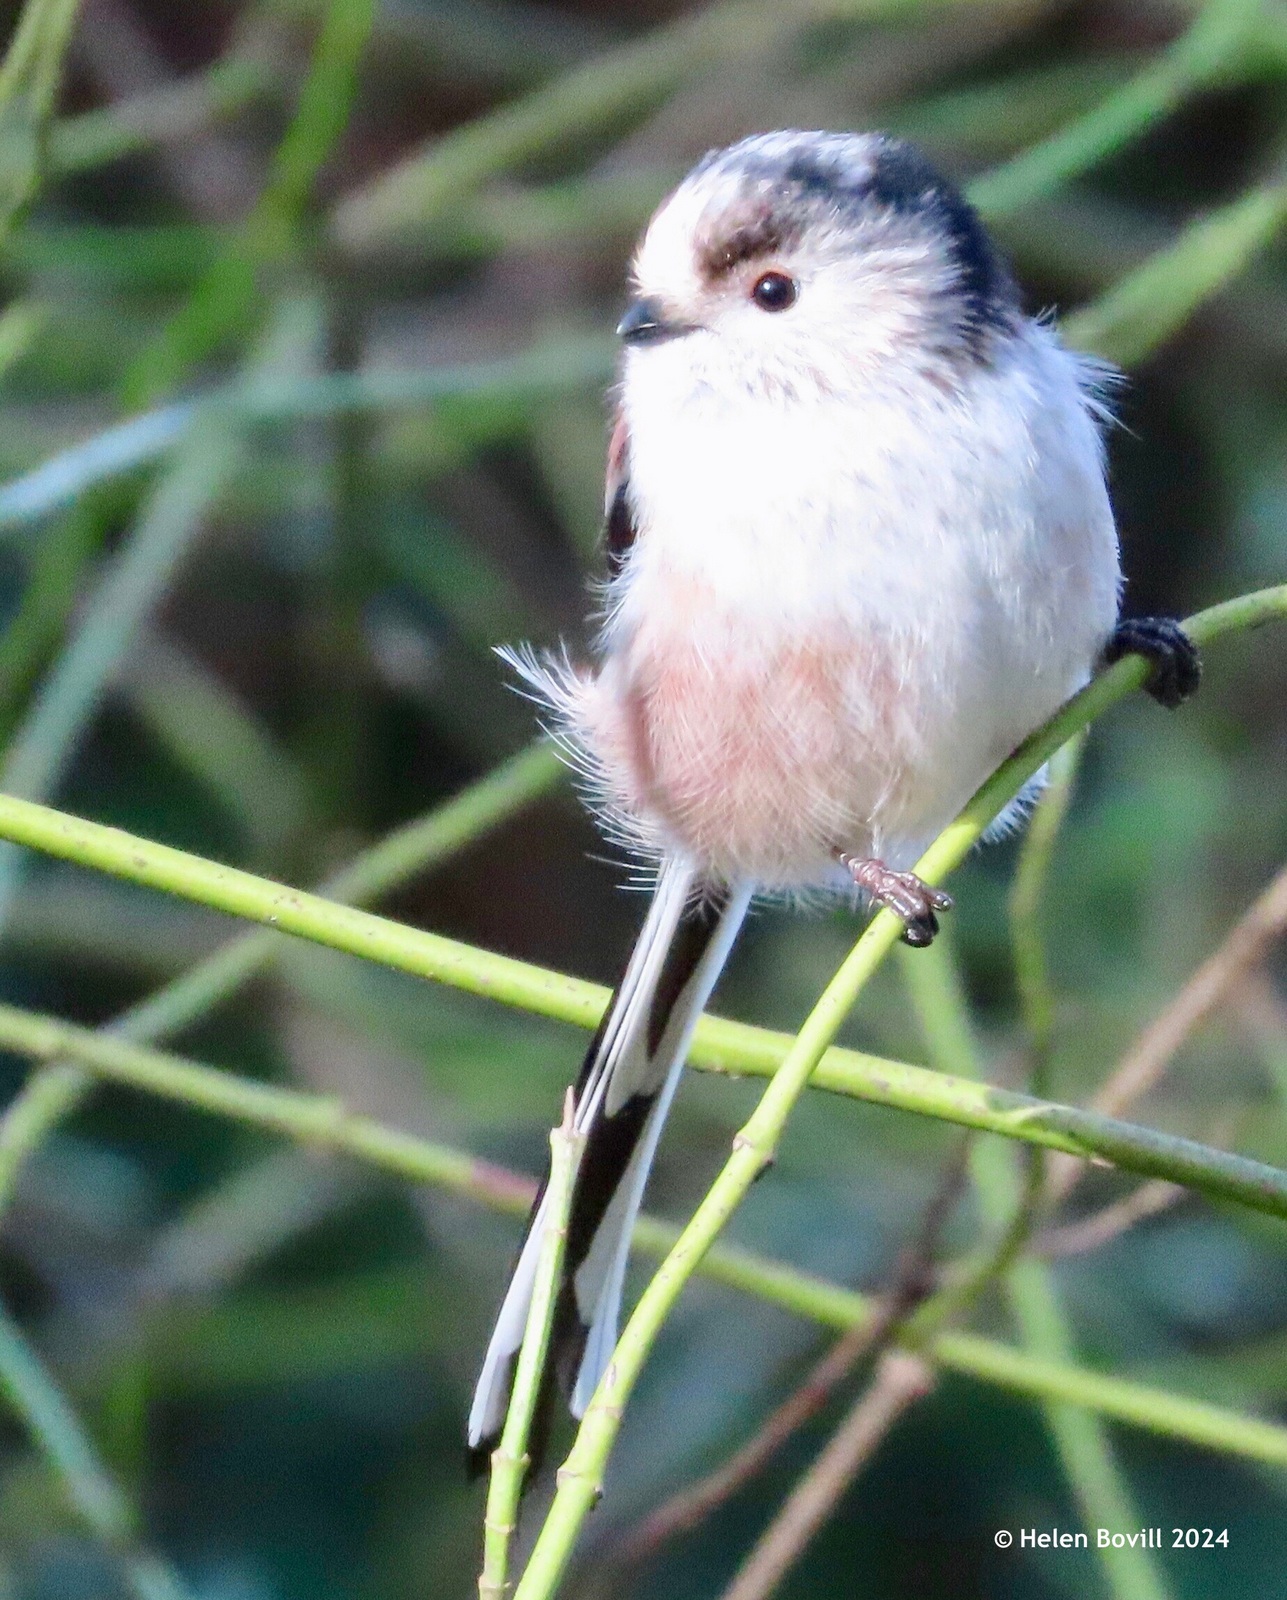 A Long-tailed tit perched on a branch in the sunshine